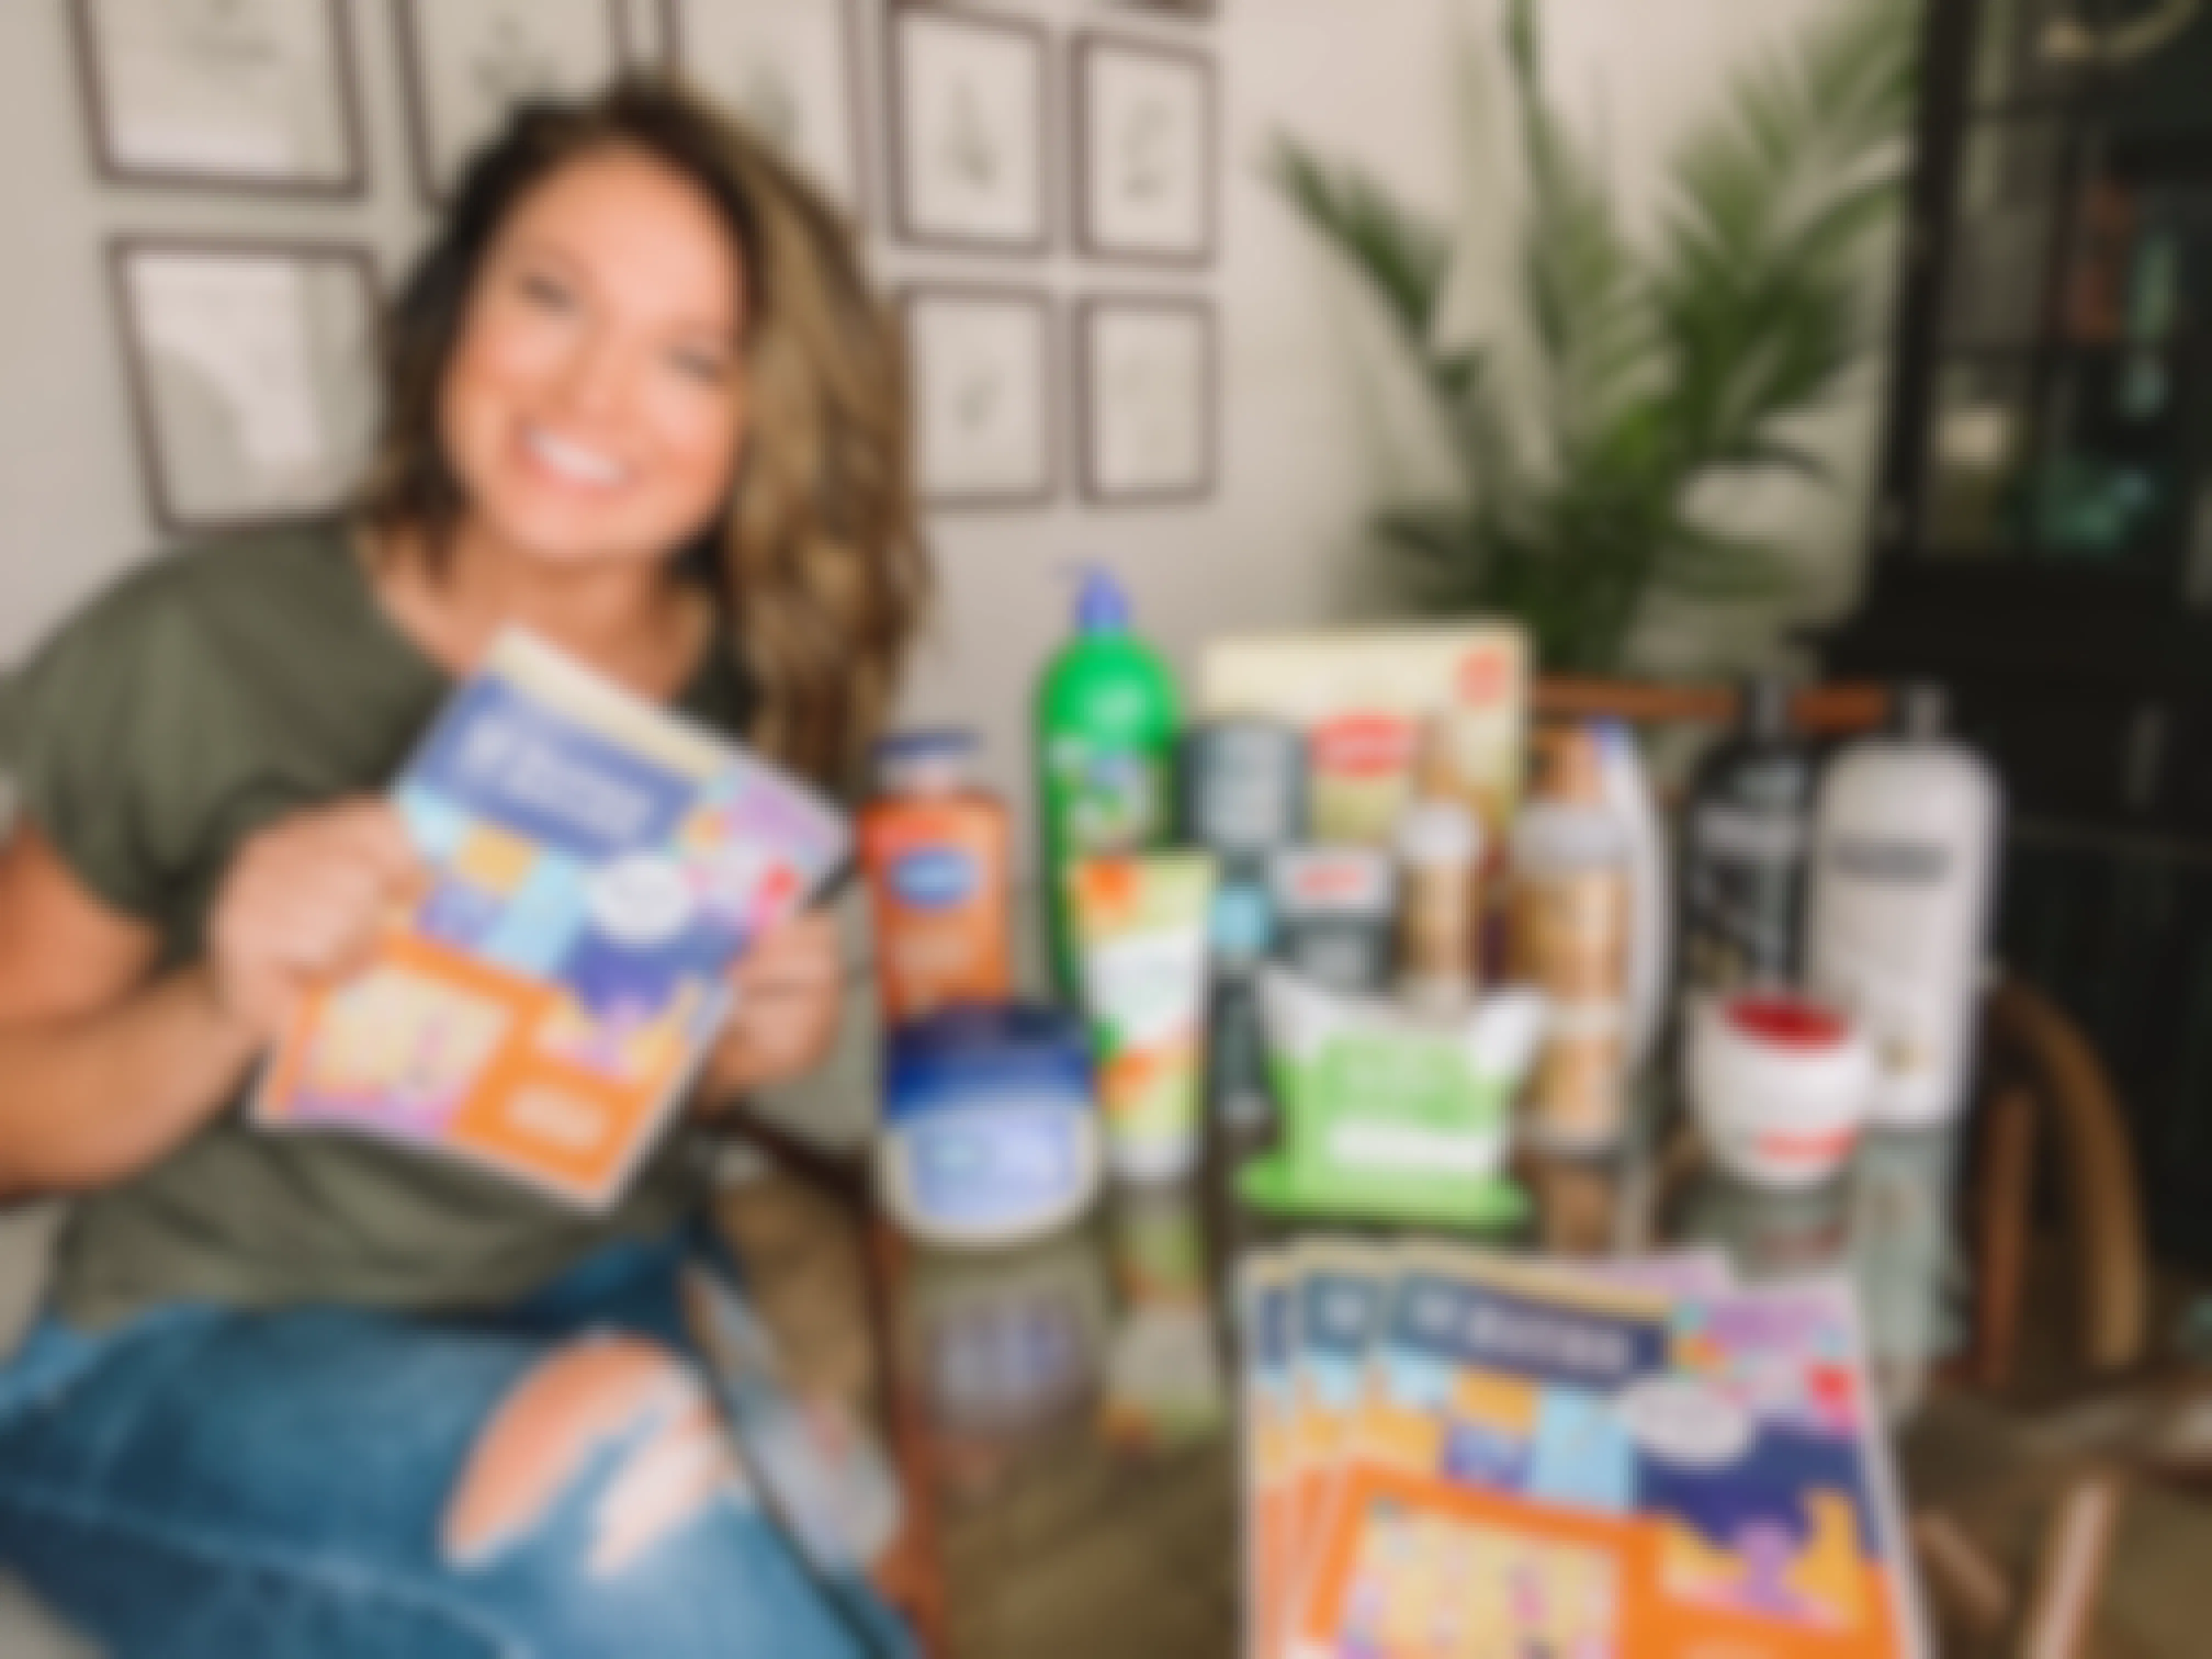 Unilever Continues Helping Families with Coupon Book & Relief Programs